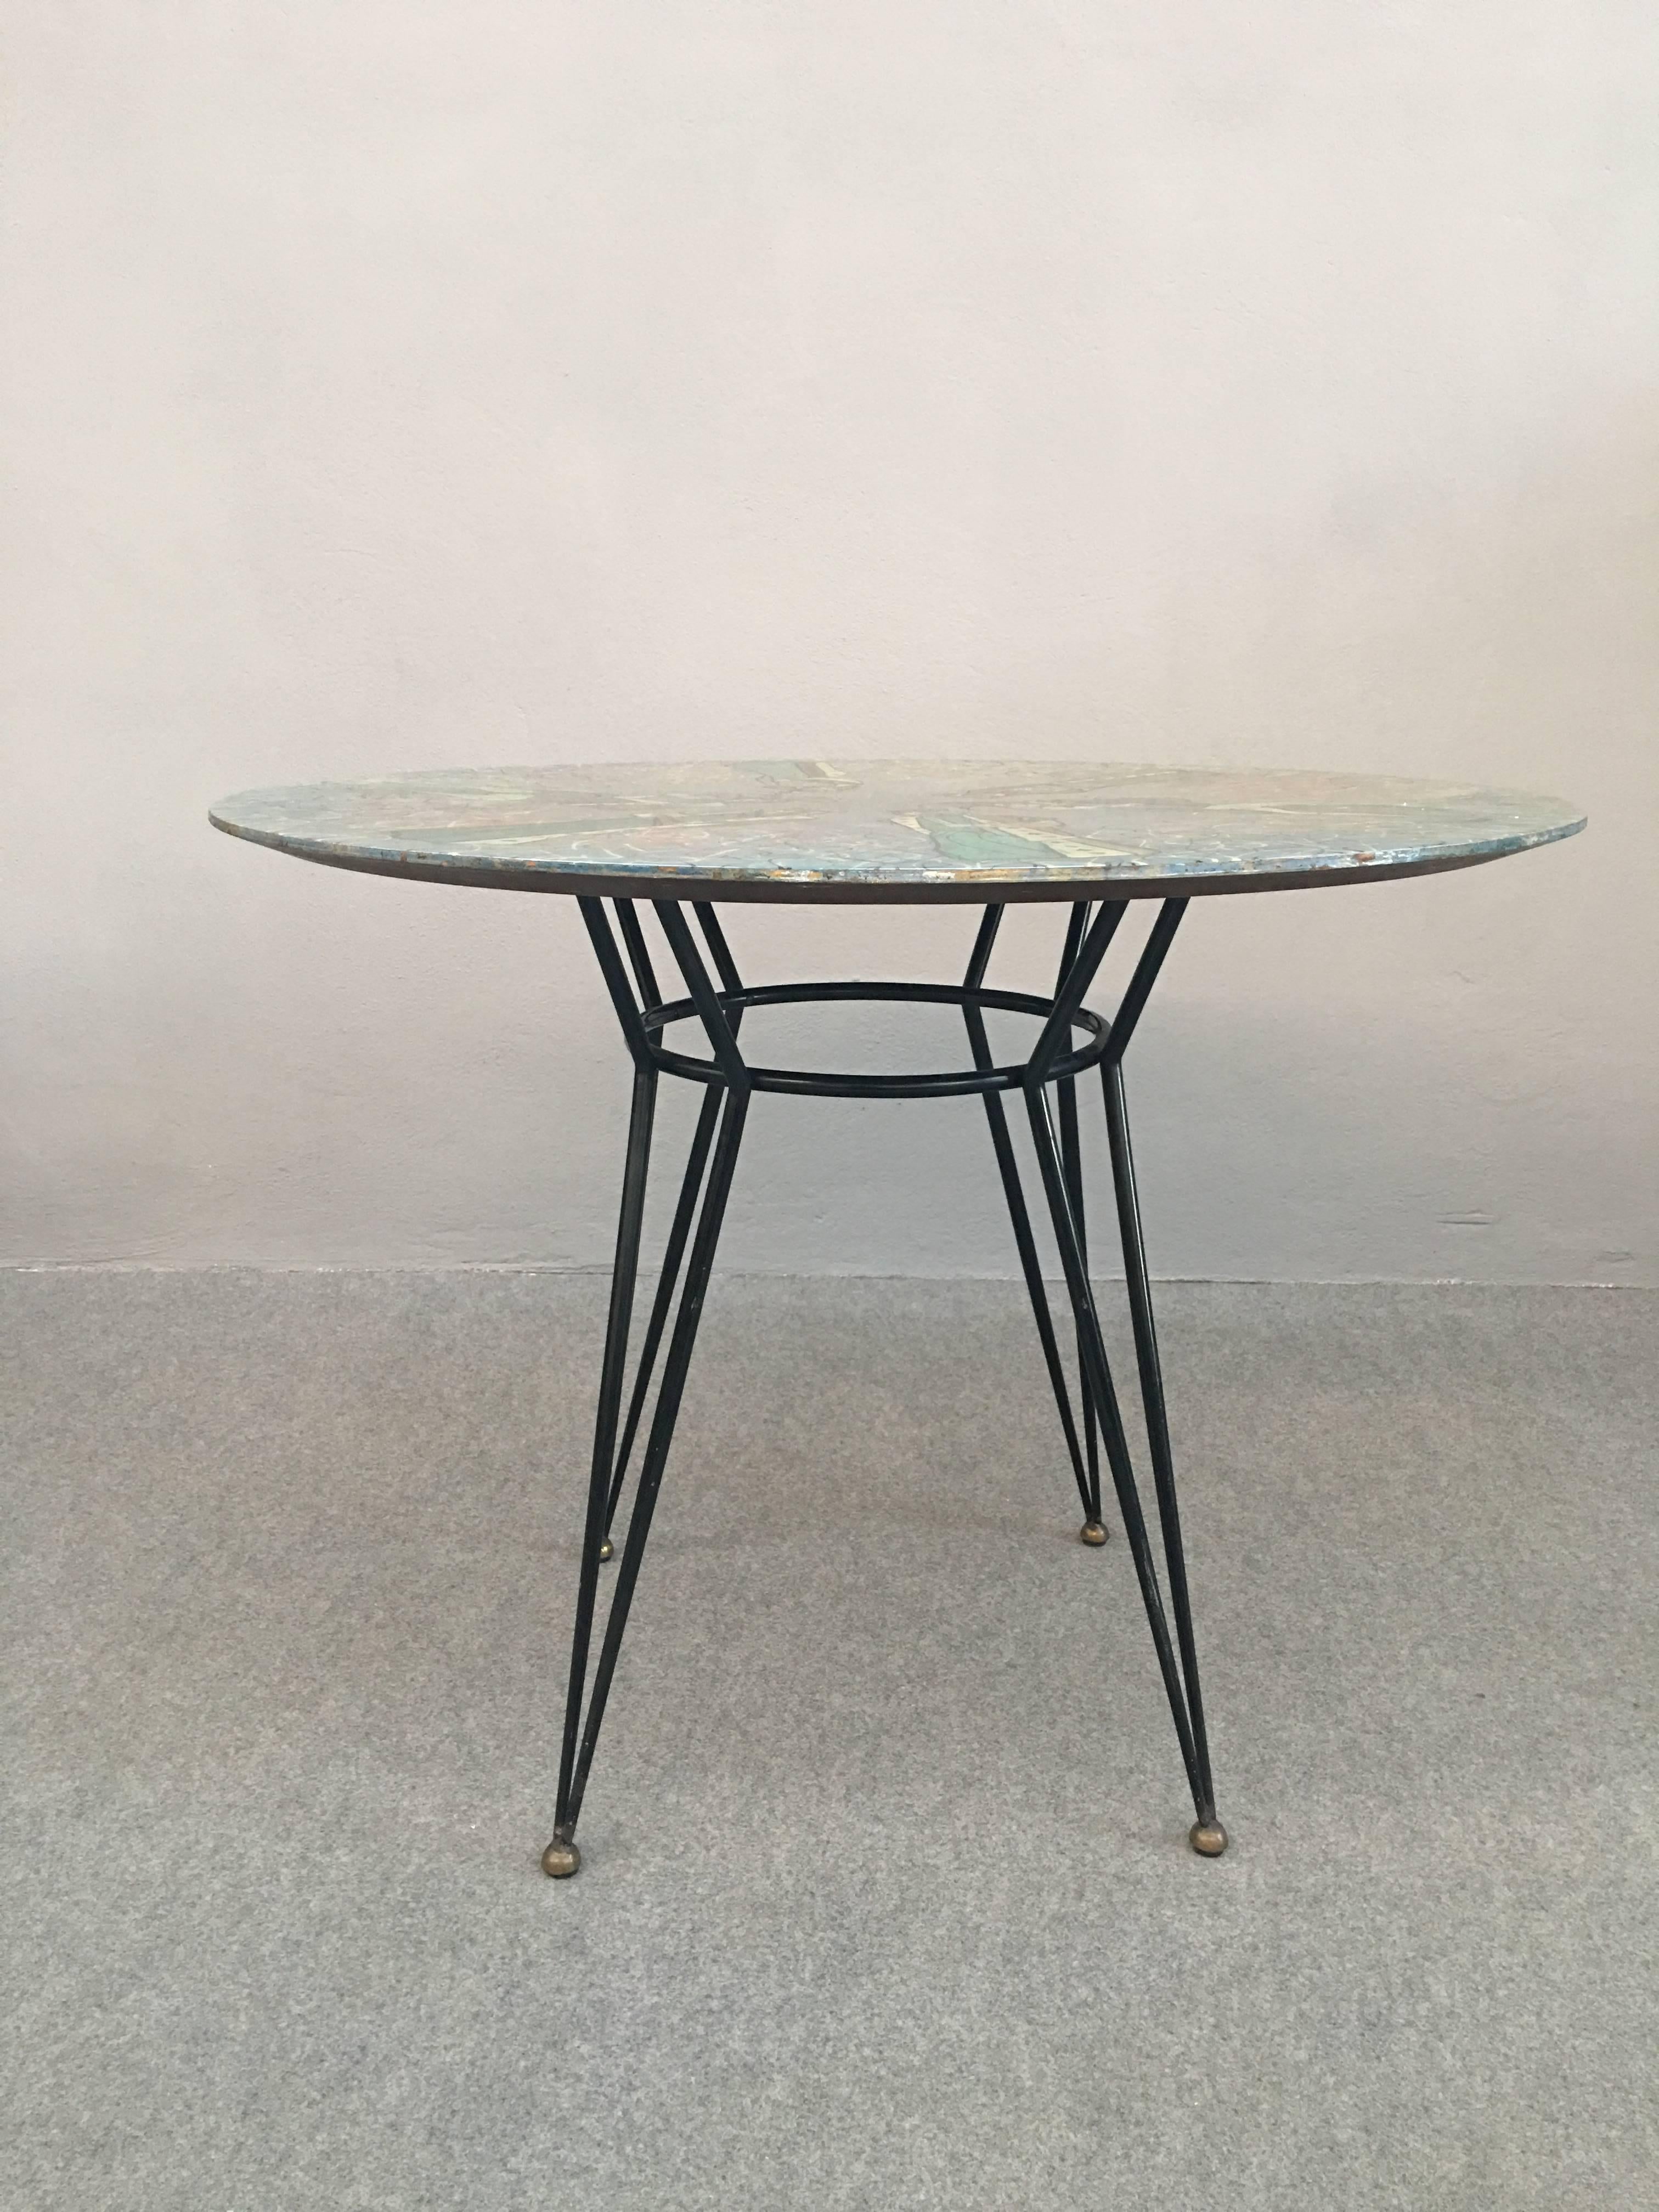 Mid-20th Century Glamorous Table by Decalage, Signed